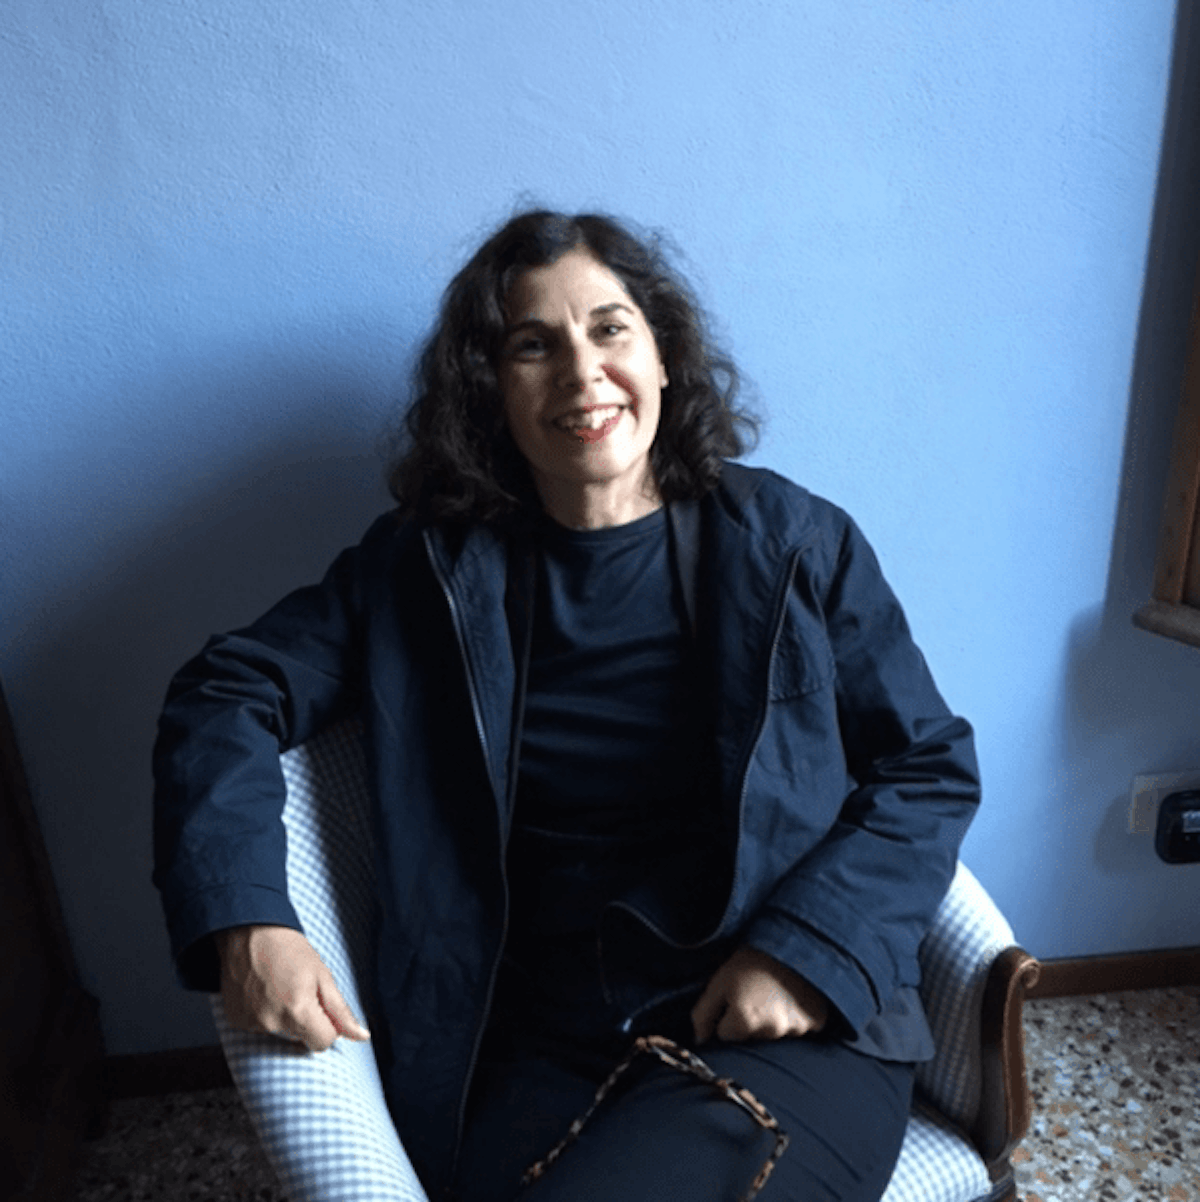 Mercedes Vicente smiling on a bright room with blue colours